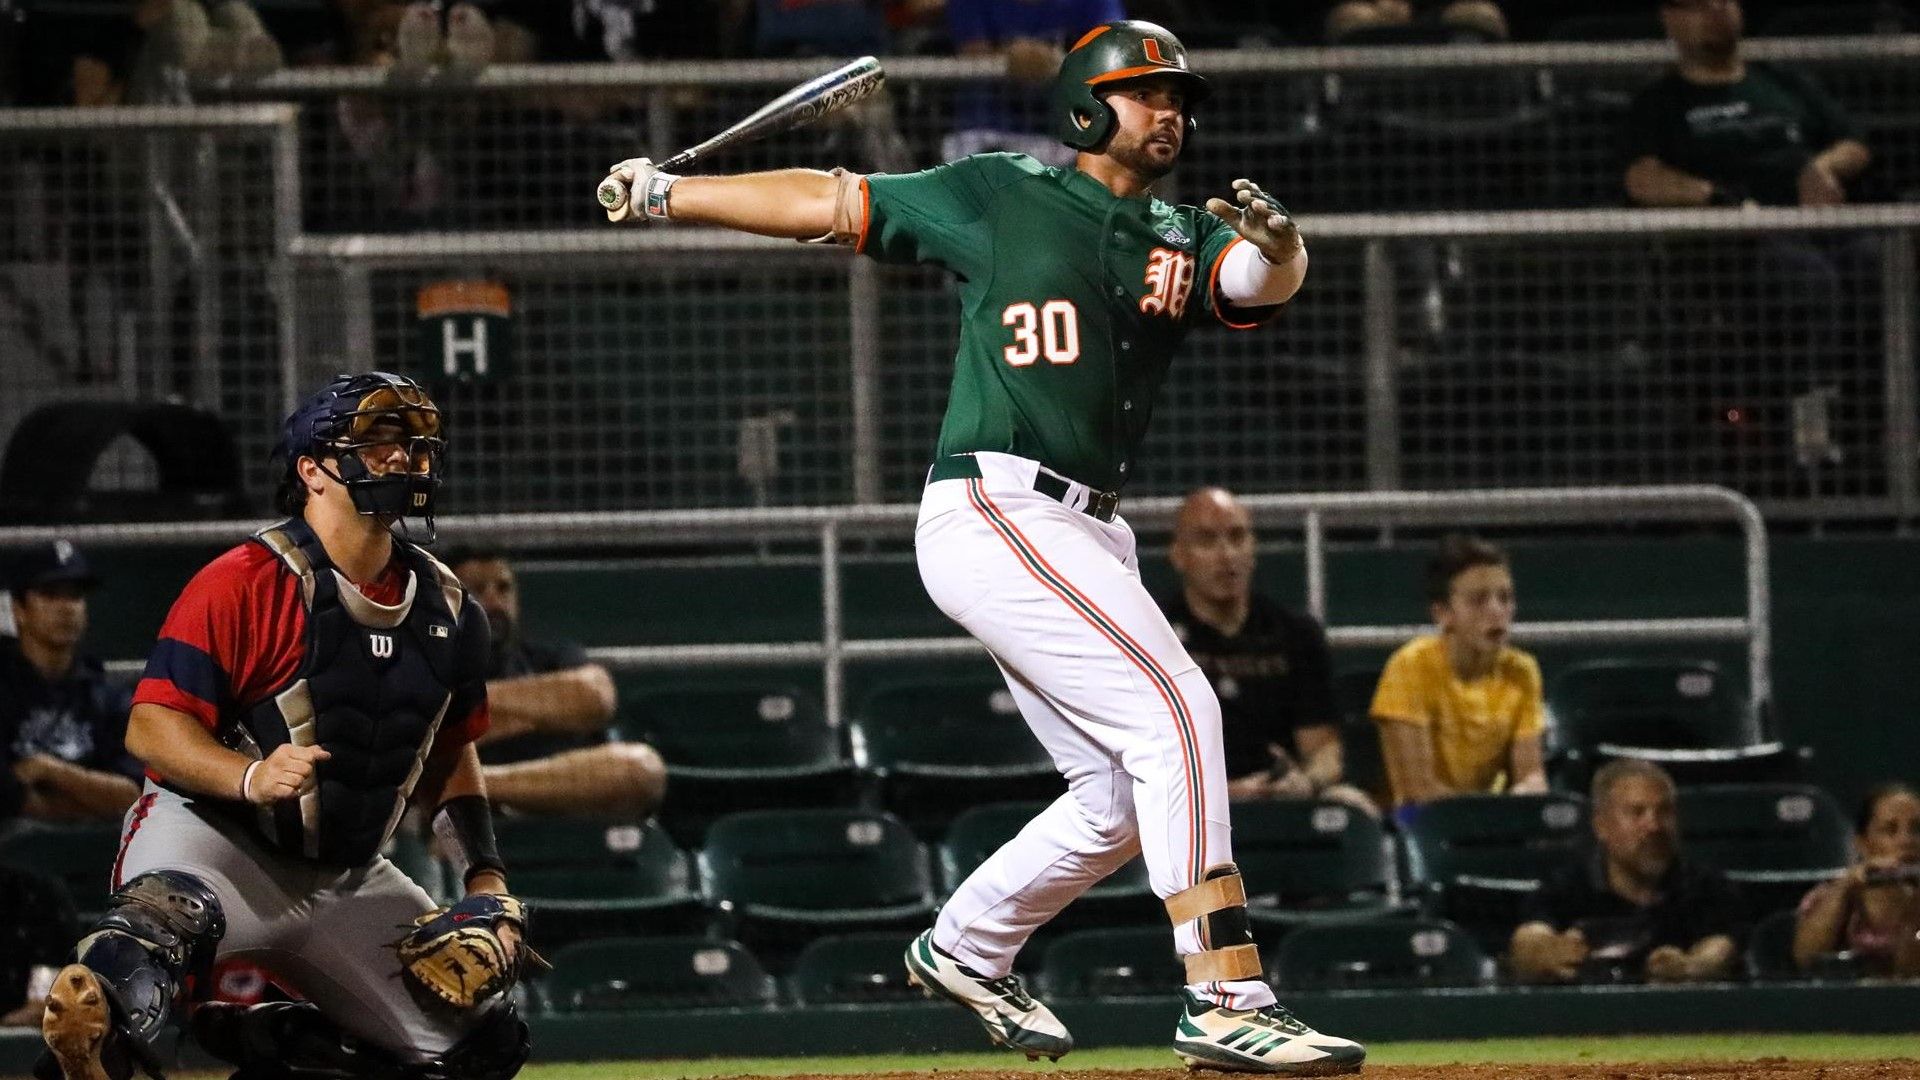 Toral's Two Homers Help Canes Blow By FAU, 11-4